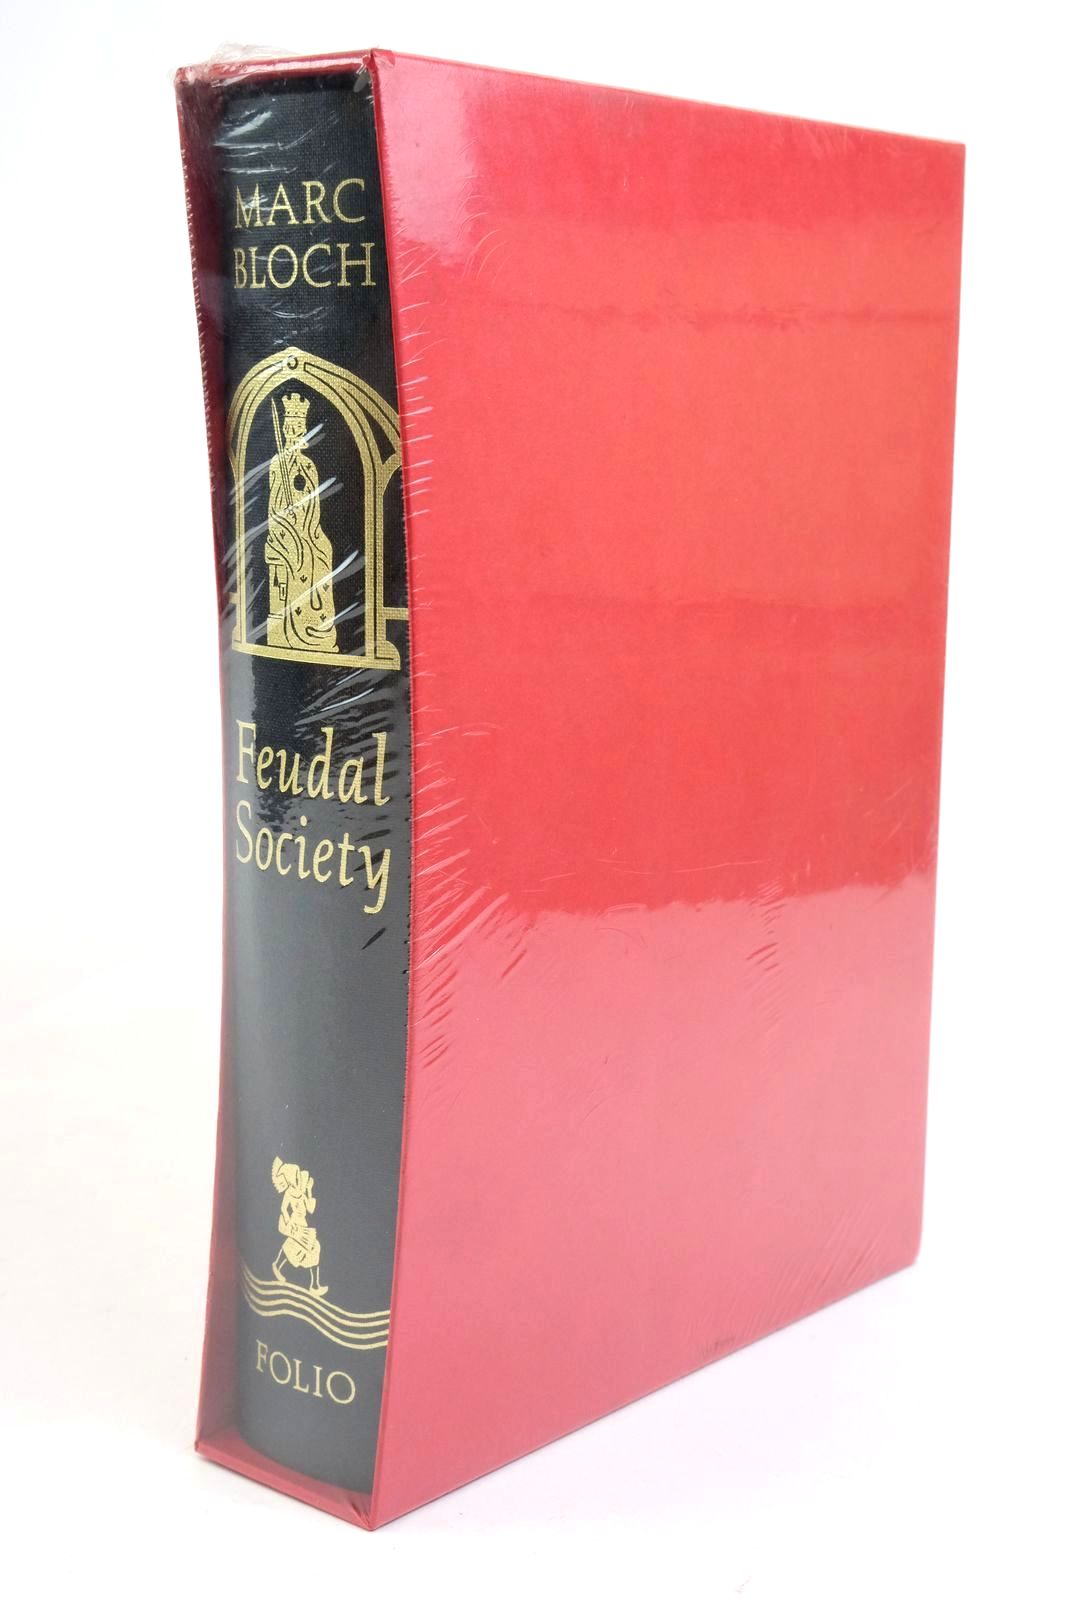 Photo of FEUDAL SOCIETY written by Bloch, Marc published by Folio Society (STOCK CODE: 1322040)  for sale by Stella & Rose's Books